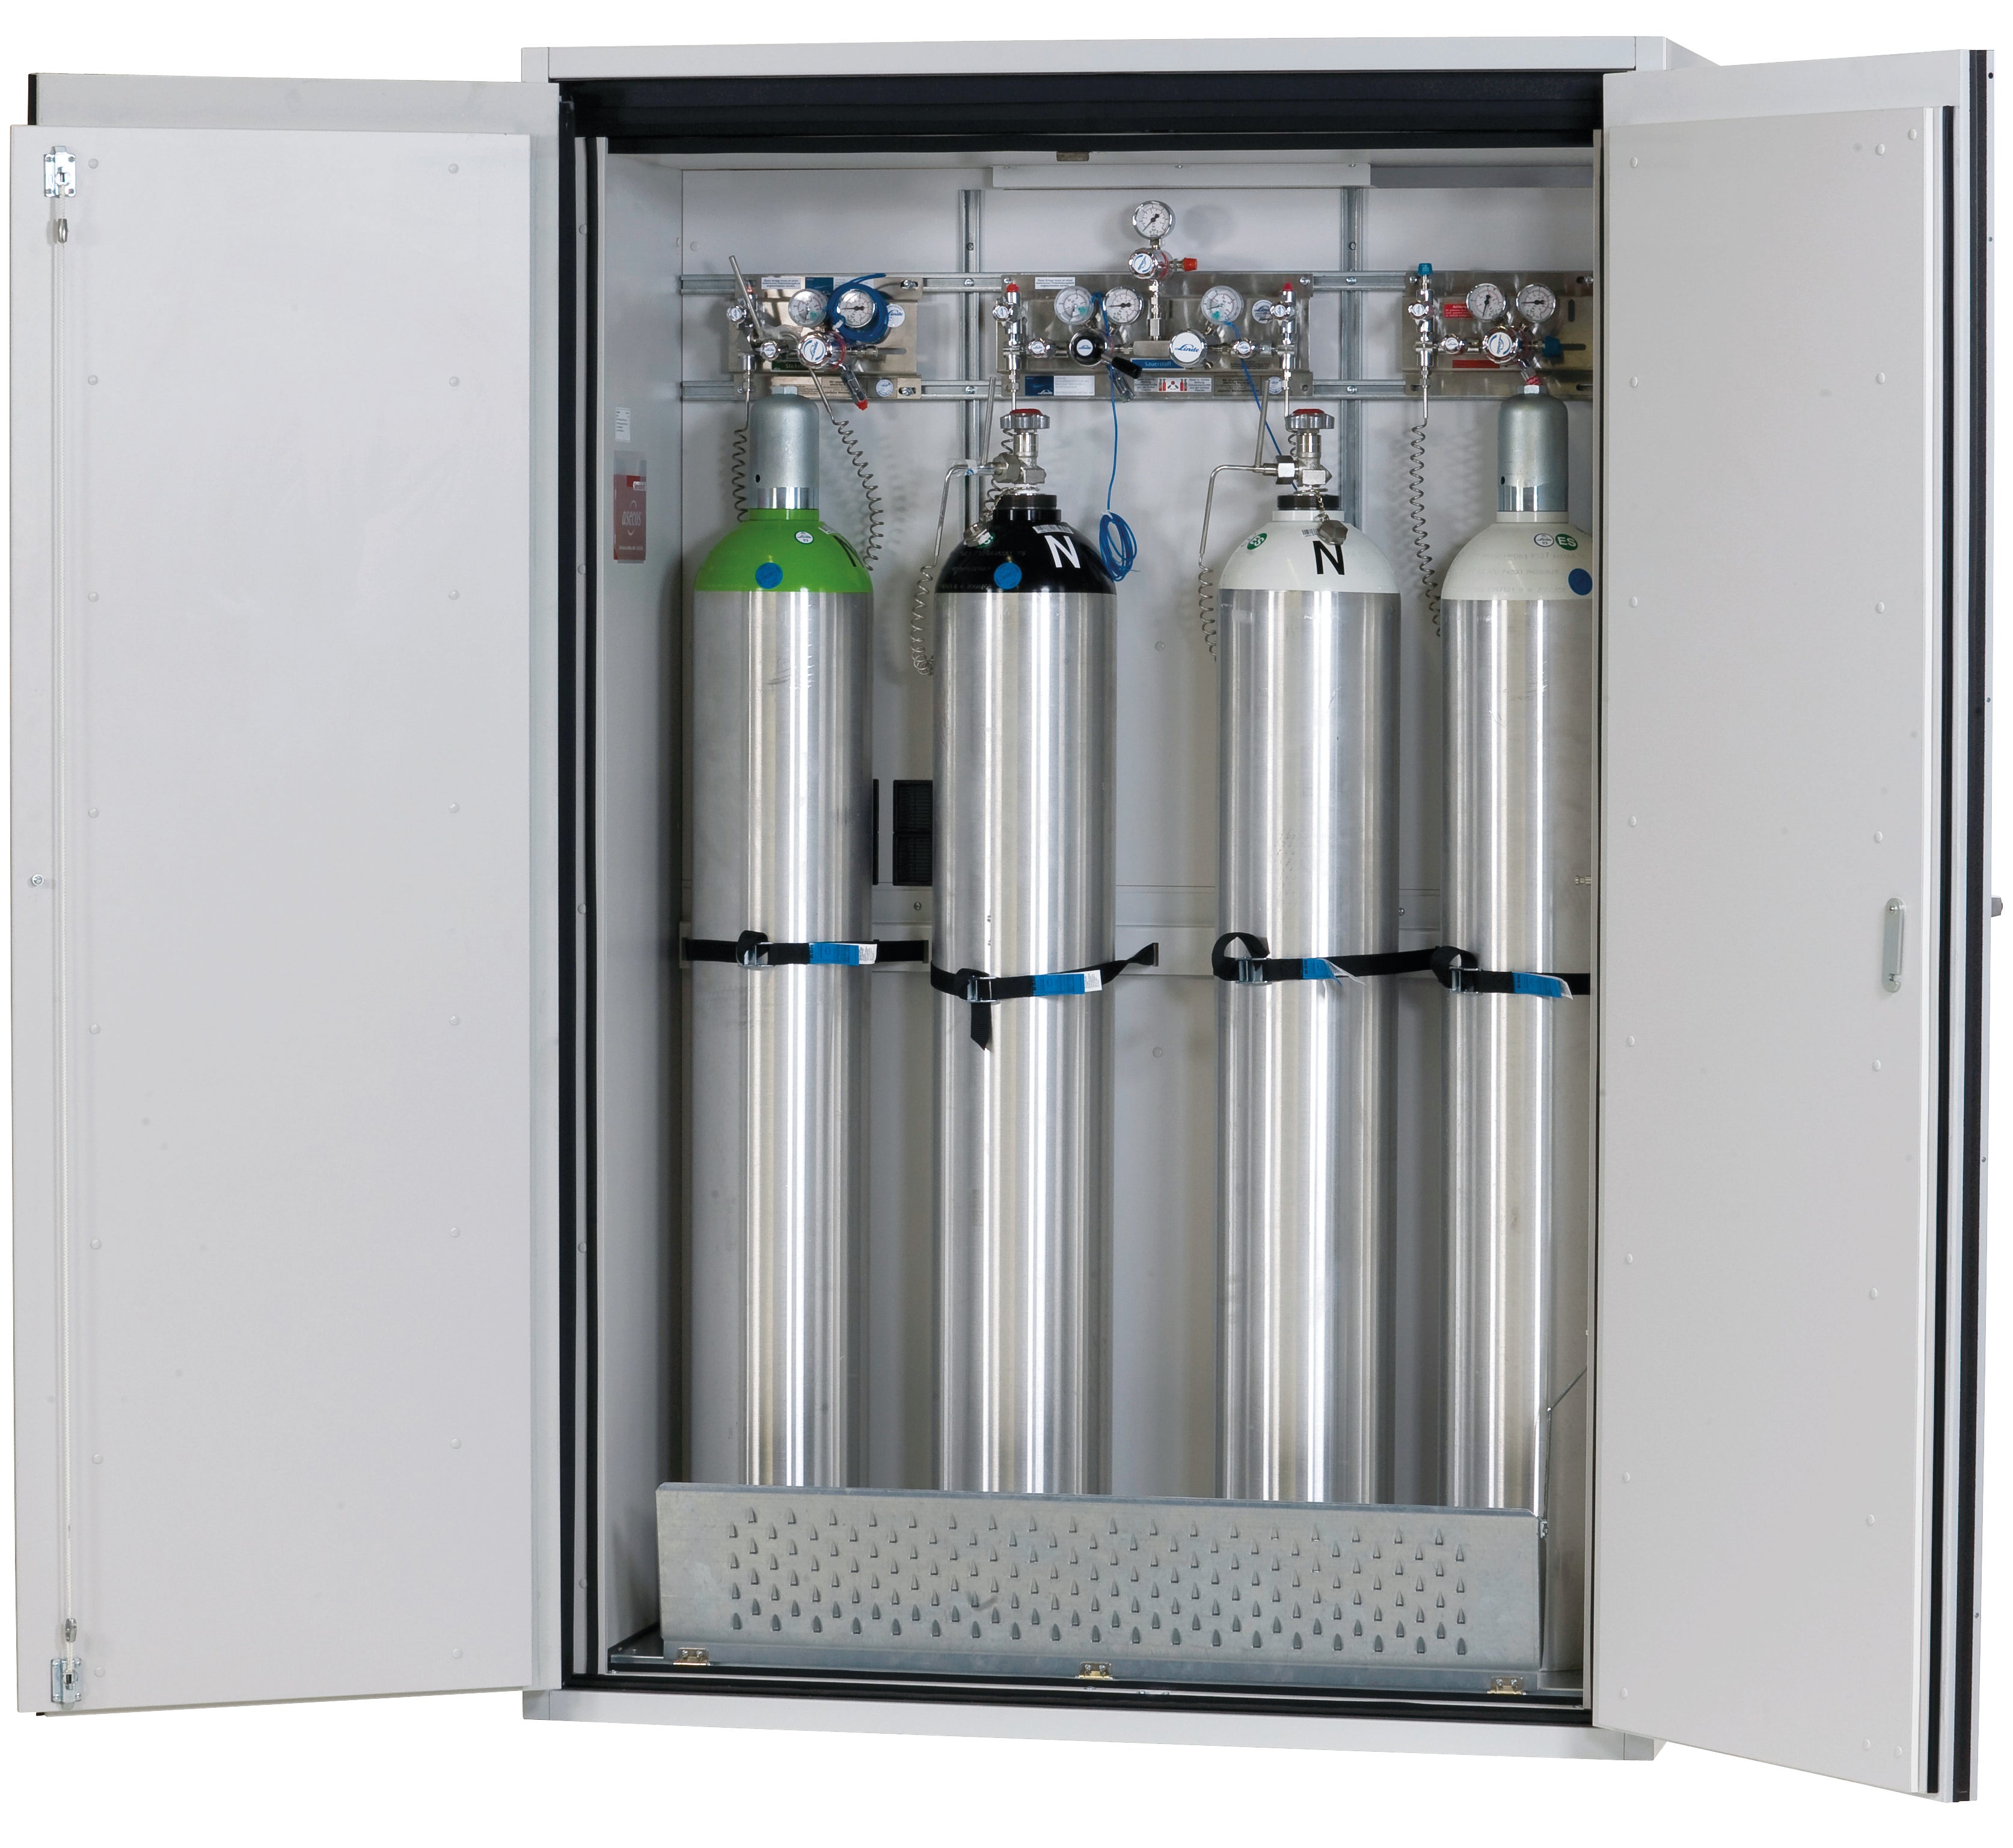 Type 90 compressed gas bottle cabinet G-ULTIMATE-90 model G90.205.140 in light gray RAL 7035 with comfortable interior fittings for 4x compressed gas bottles of 50 liters each